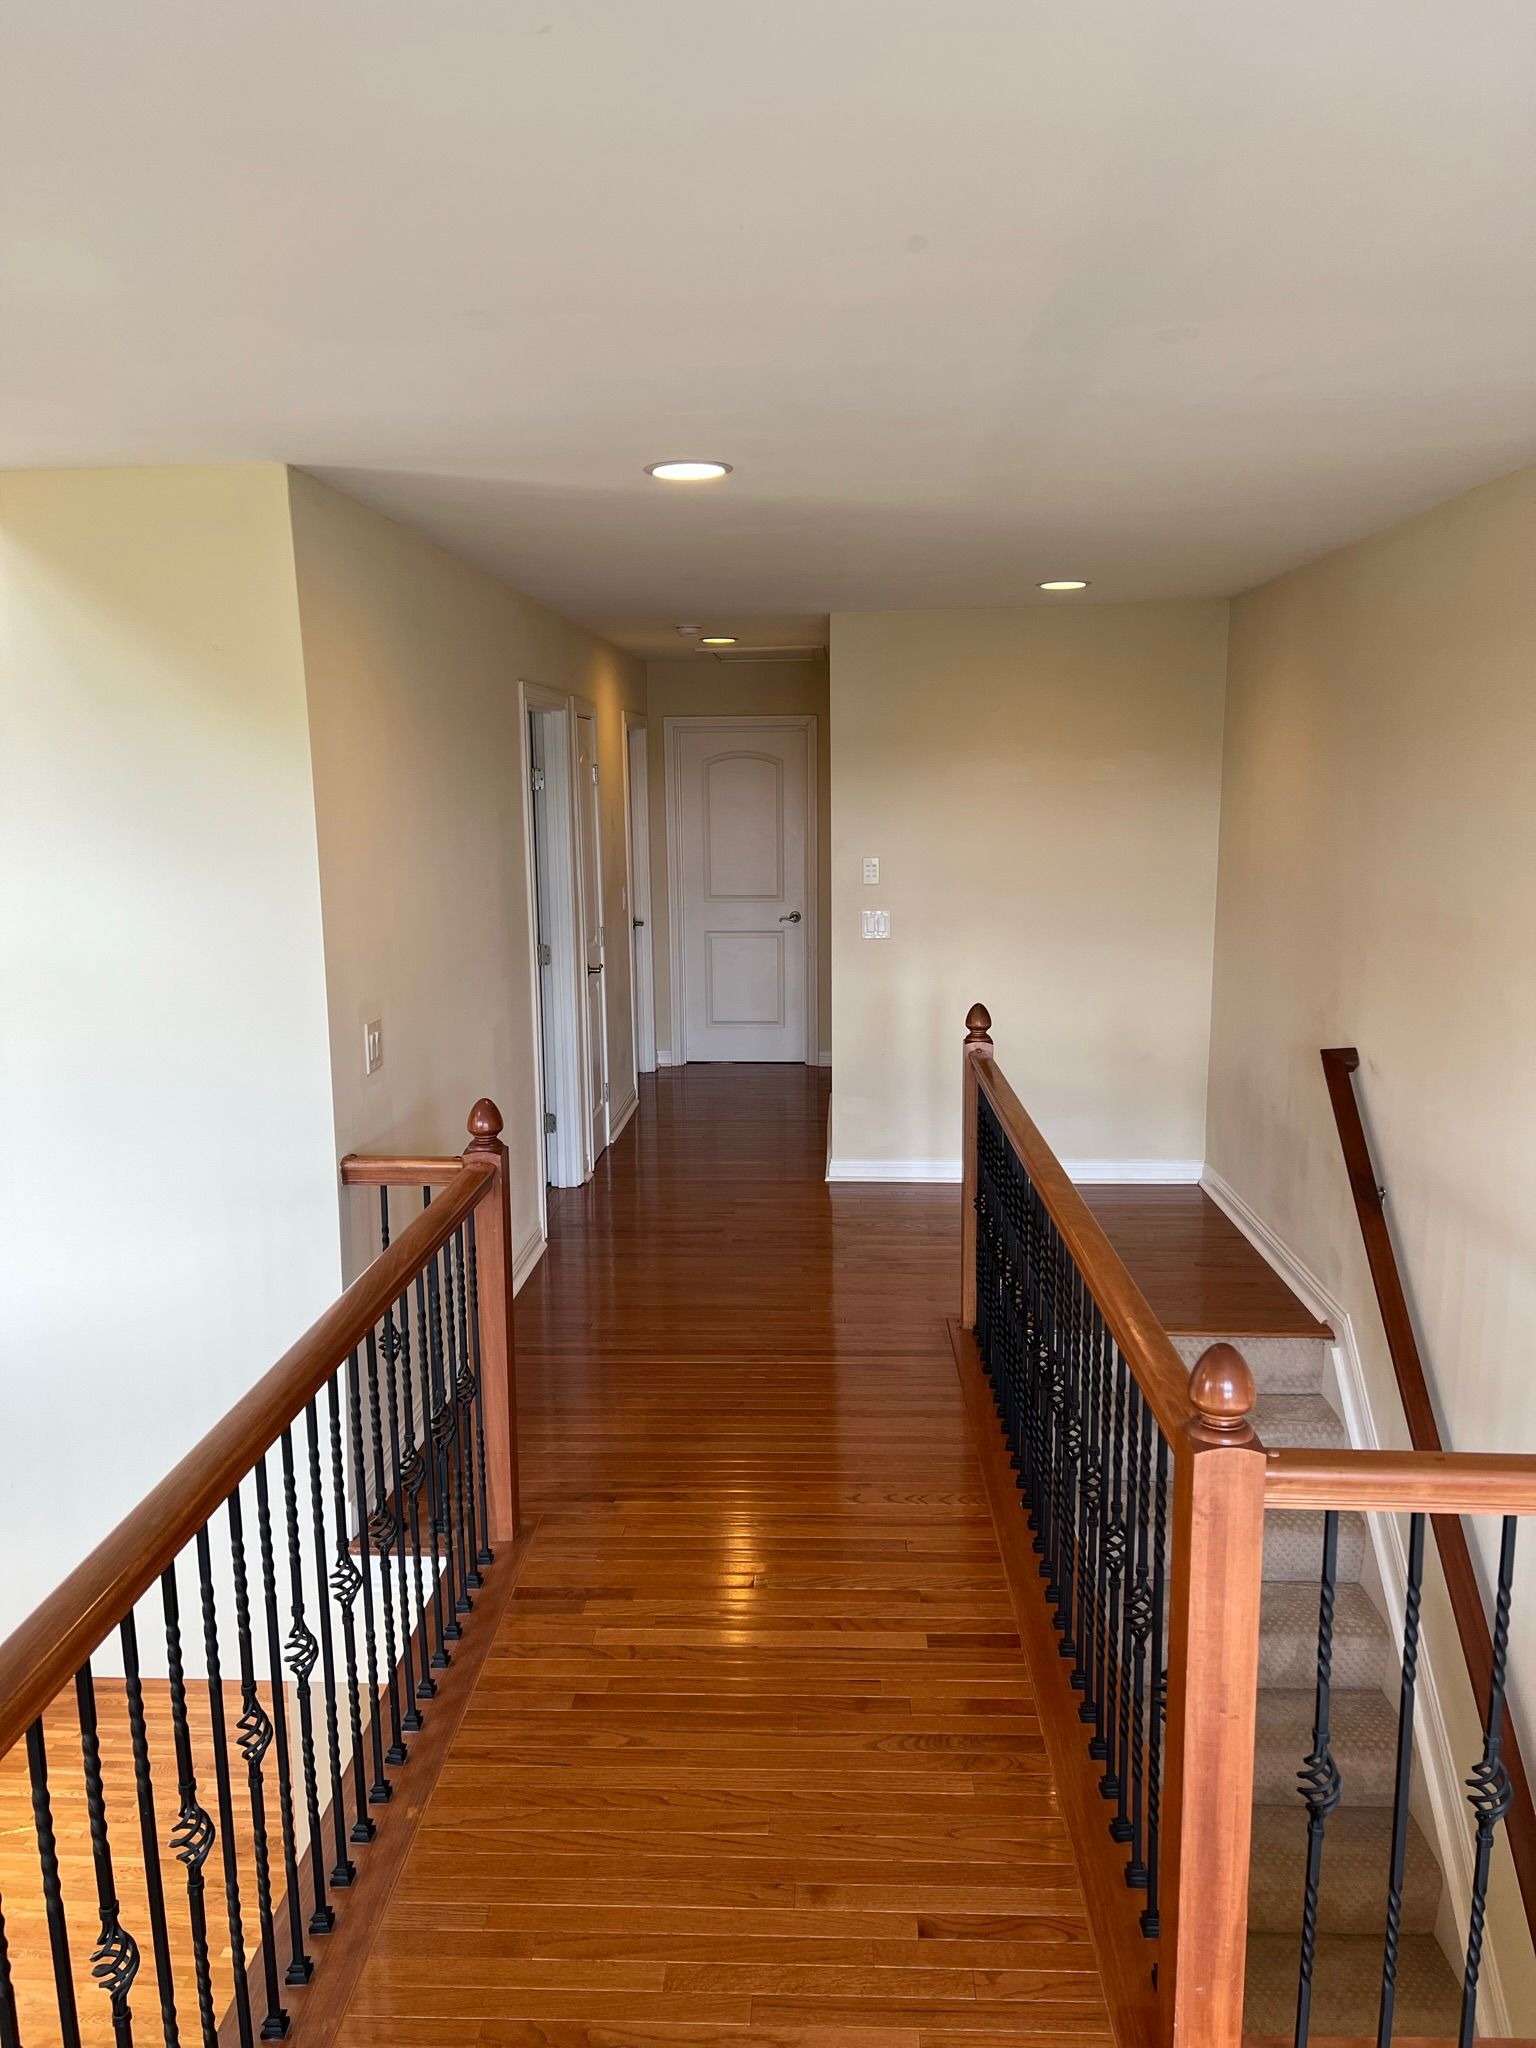 Crescent Avenue Townhomes - Hallway to staircase